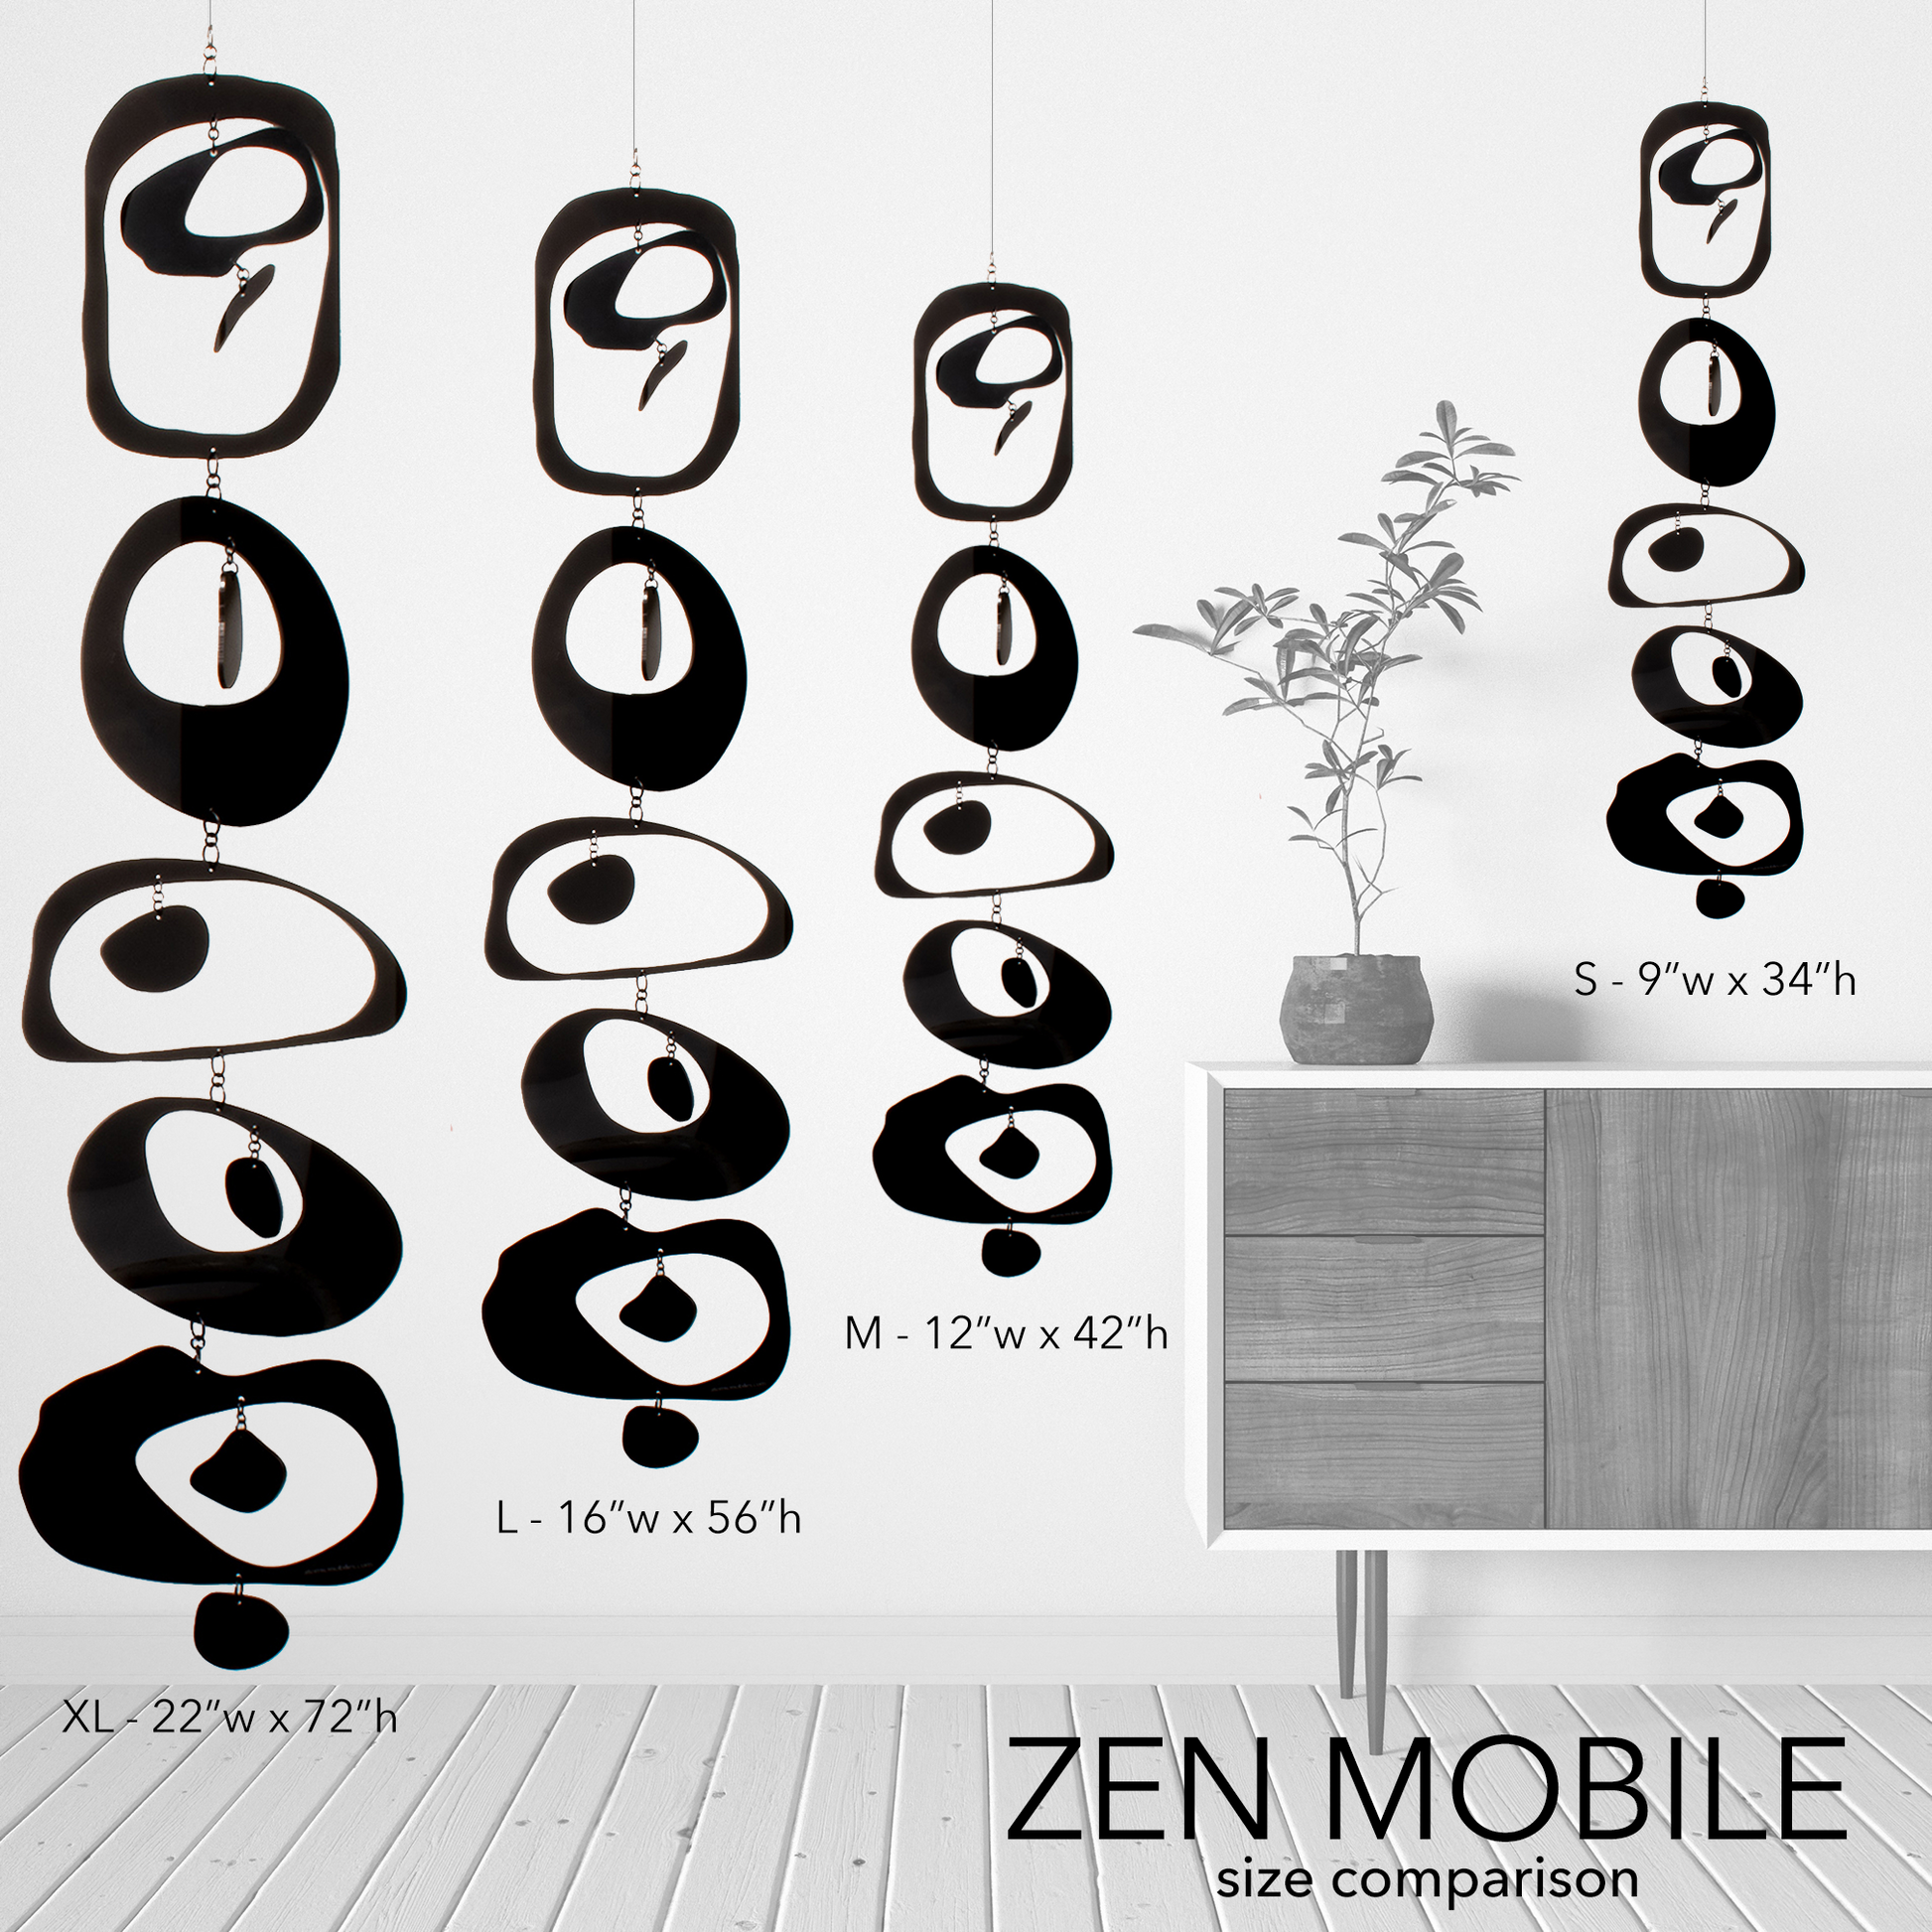 Zen Mobile Size Comparison Chart - zen inspired hanging art mobiles by AtomicMobiles.com